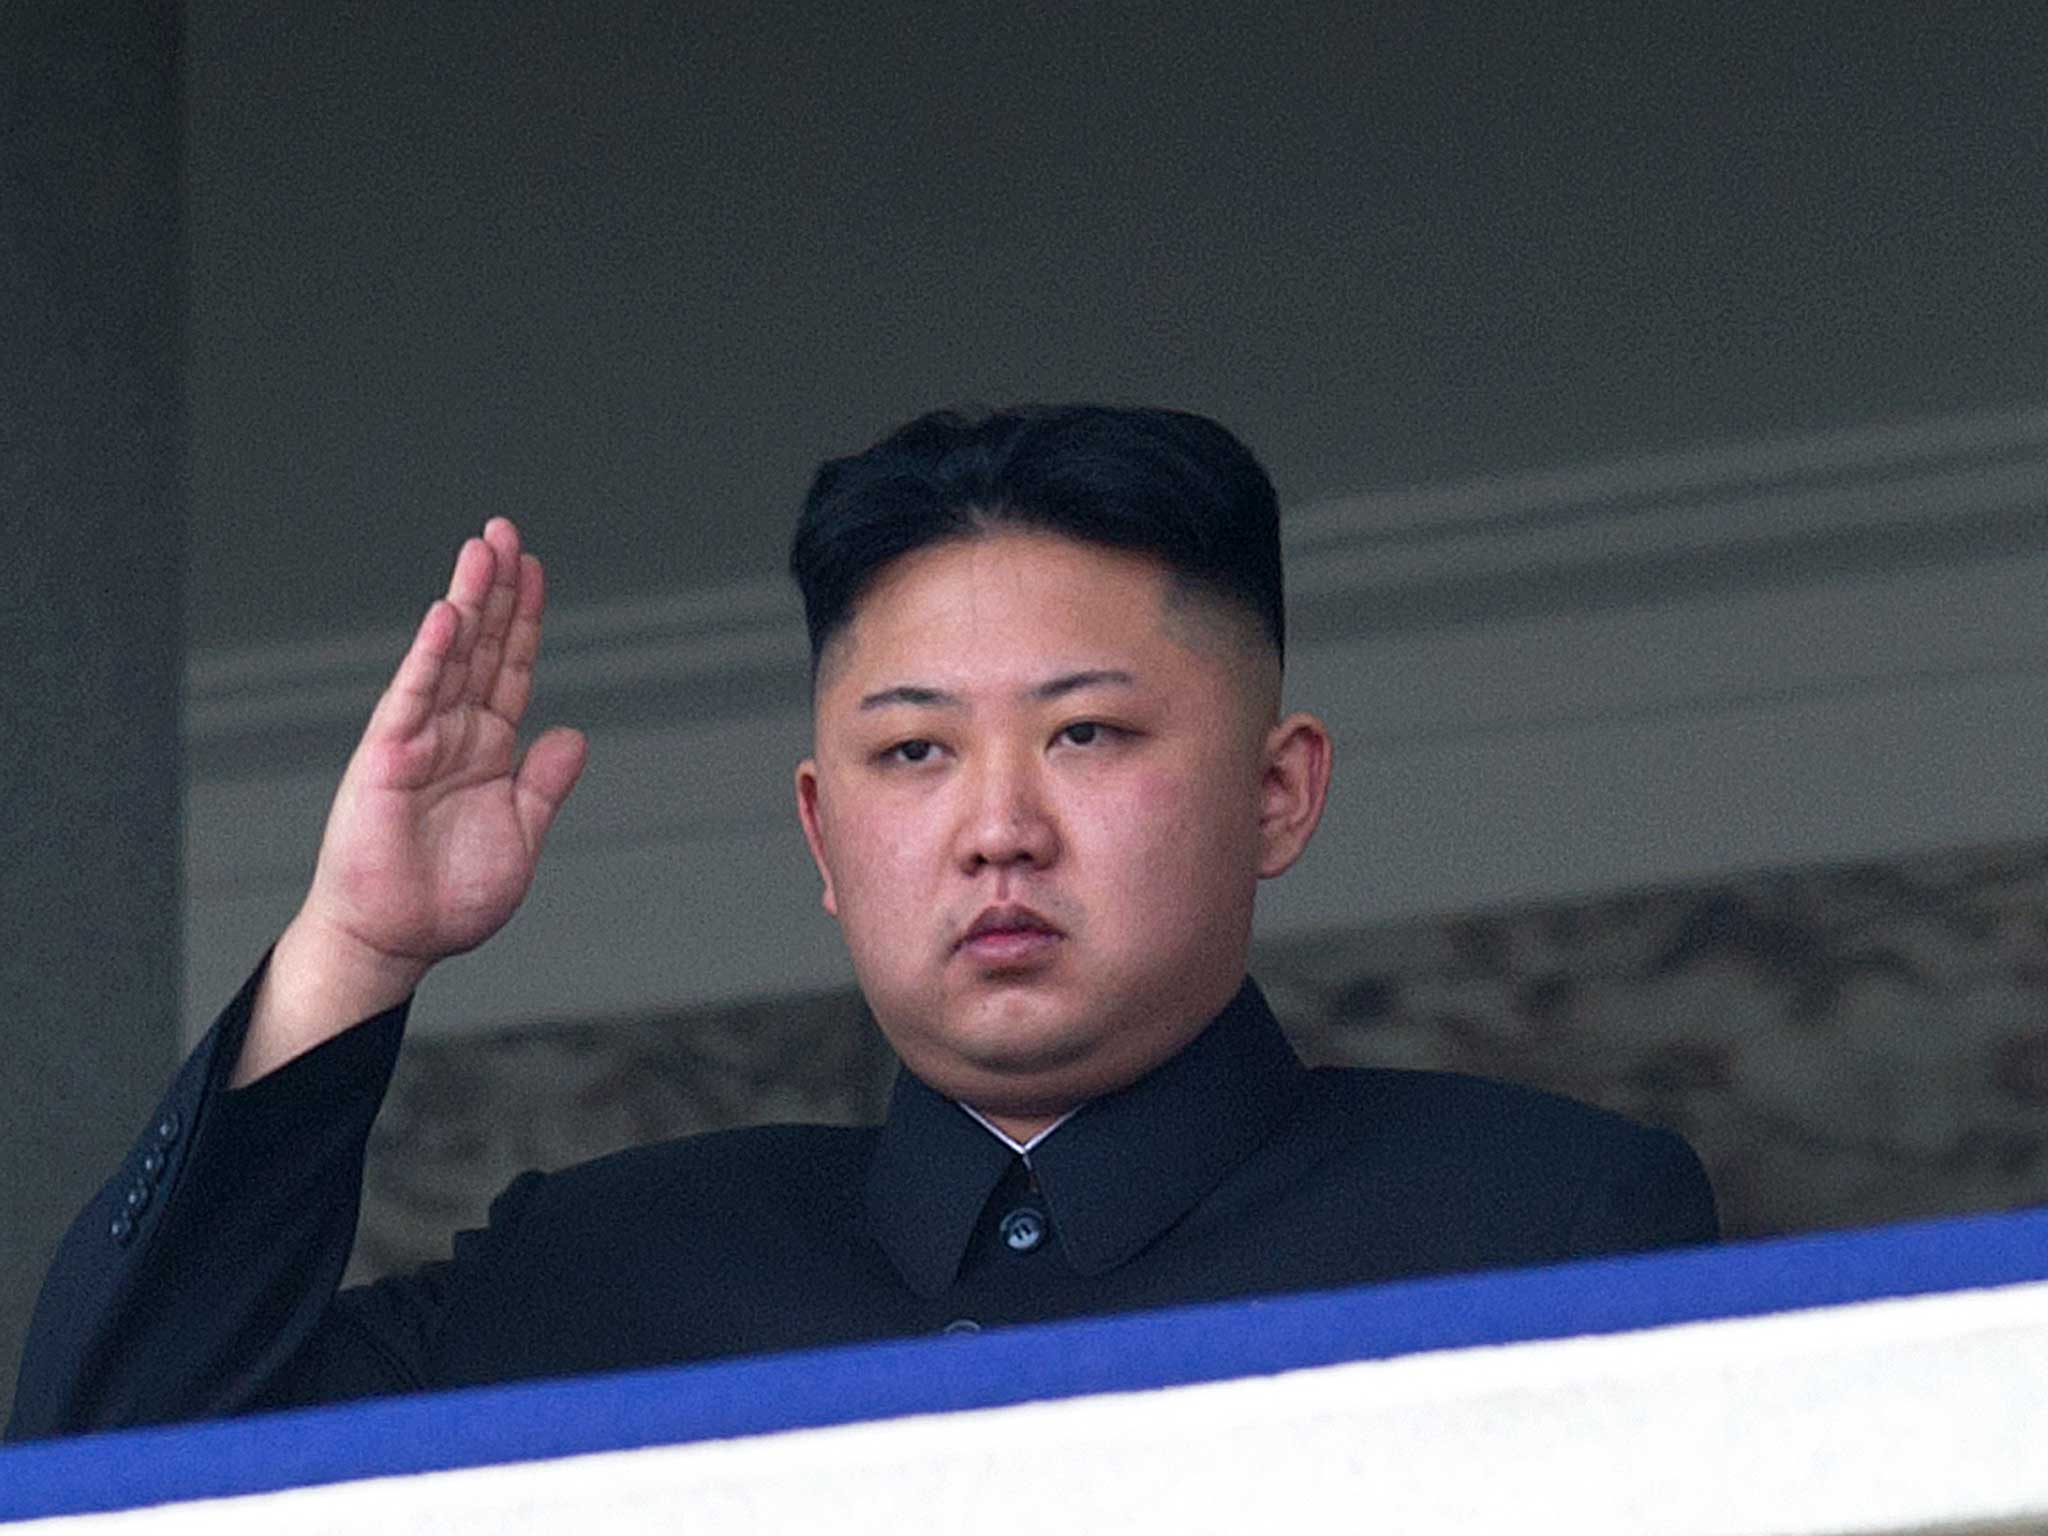 The statement claimed North Korea would not hesitate to 'cope with' its enemies